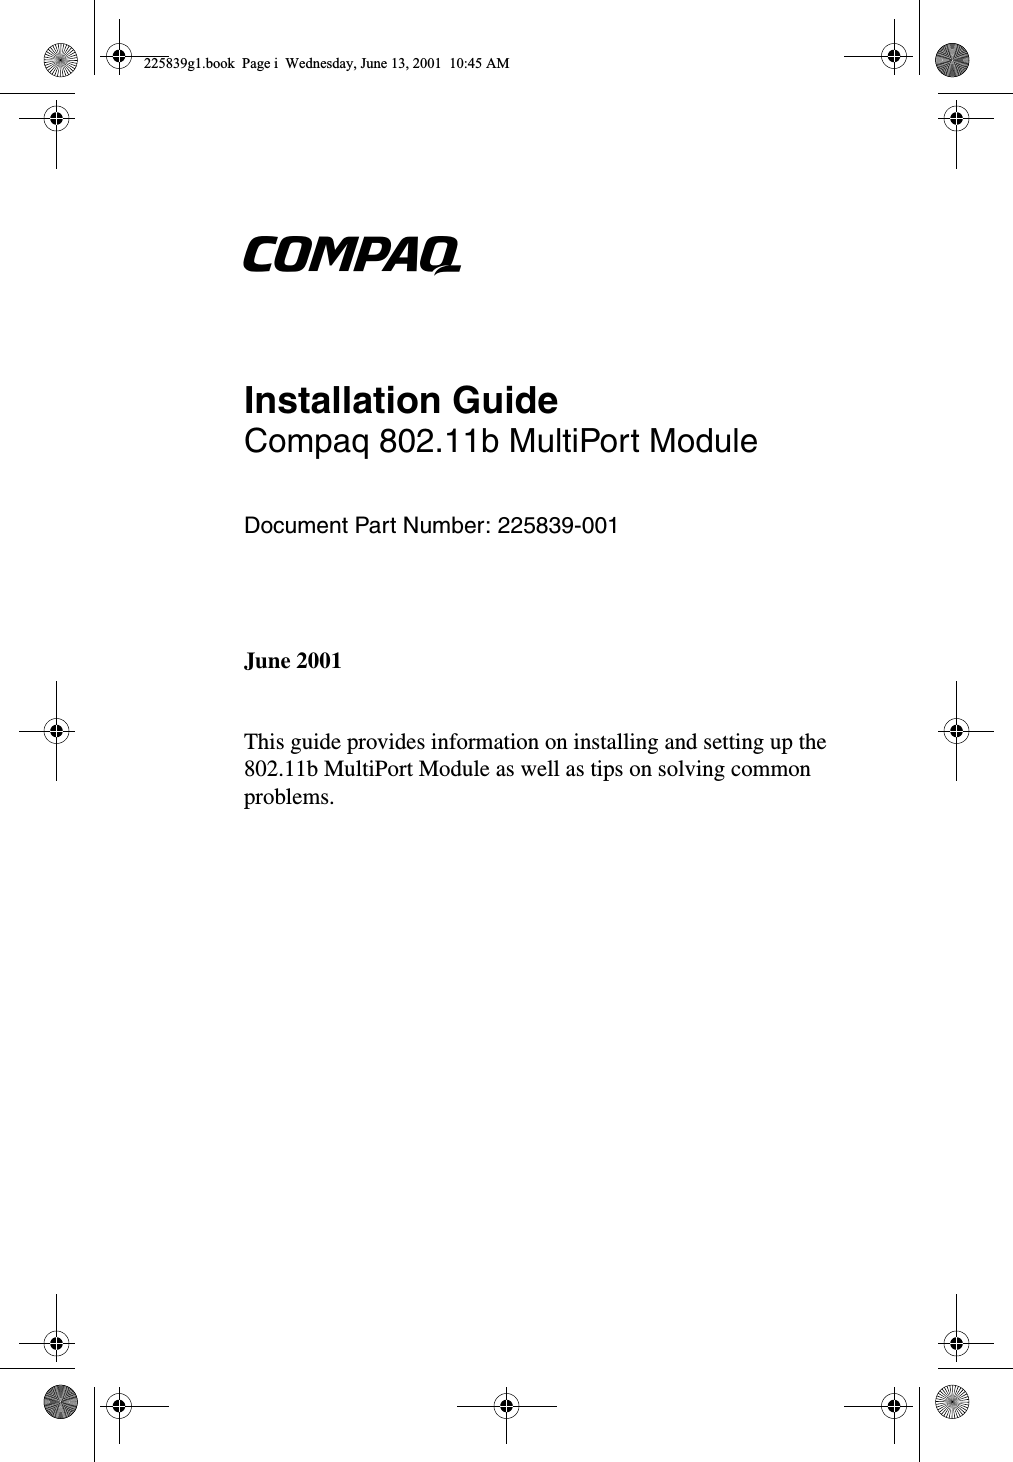 bInstallation GuideCompaq 802.11b MultiPort ModuleDocument Part Number: 225839-001June 2001This guide provides information on installing and setting up the 802.11b MultiPort Module as well as tips on solving common problems.225839g1.book  Page i  Wednesday, June 13, 2001  10:45 AM